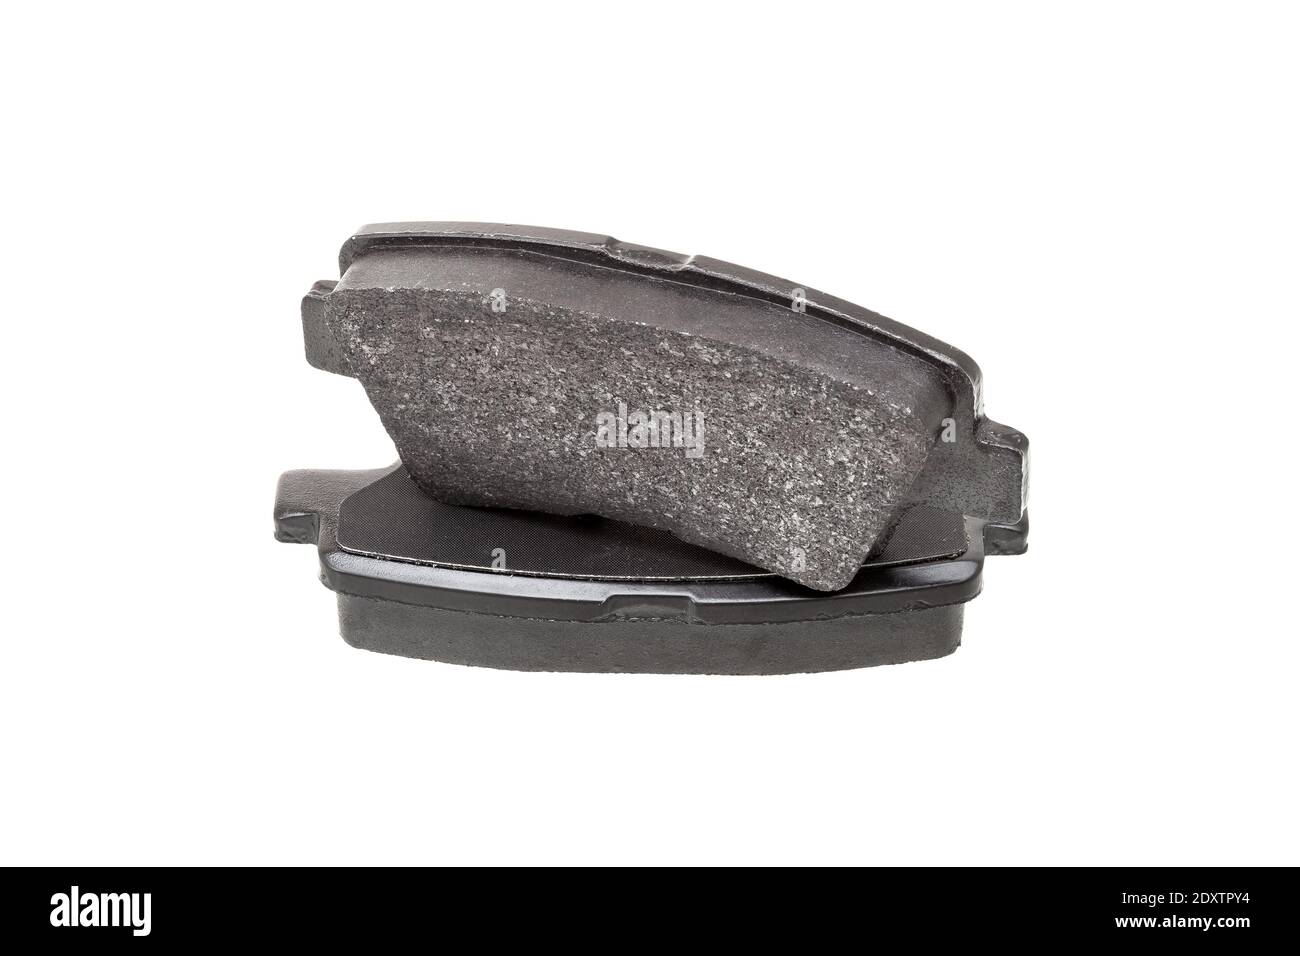 brake pads one on top of the other demonstrate the thickness of asbestos abrasive coating, new car spare parts isolated on white background. Stock Photo